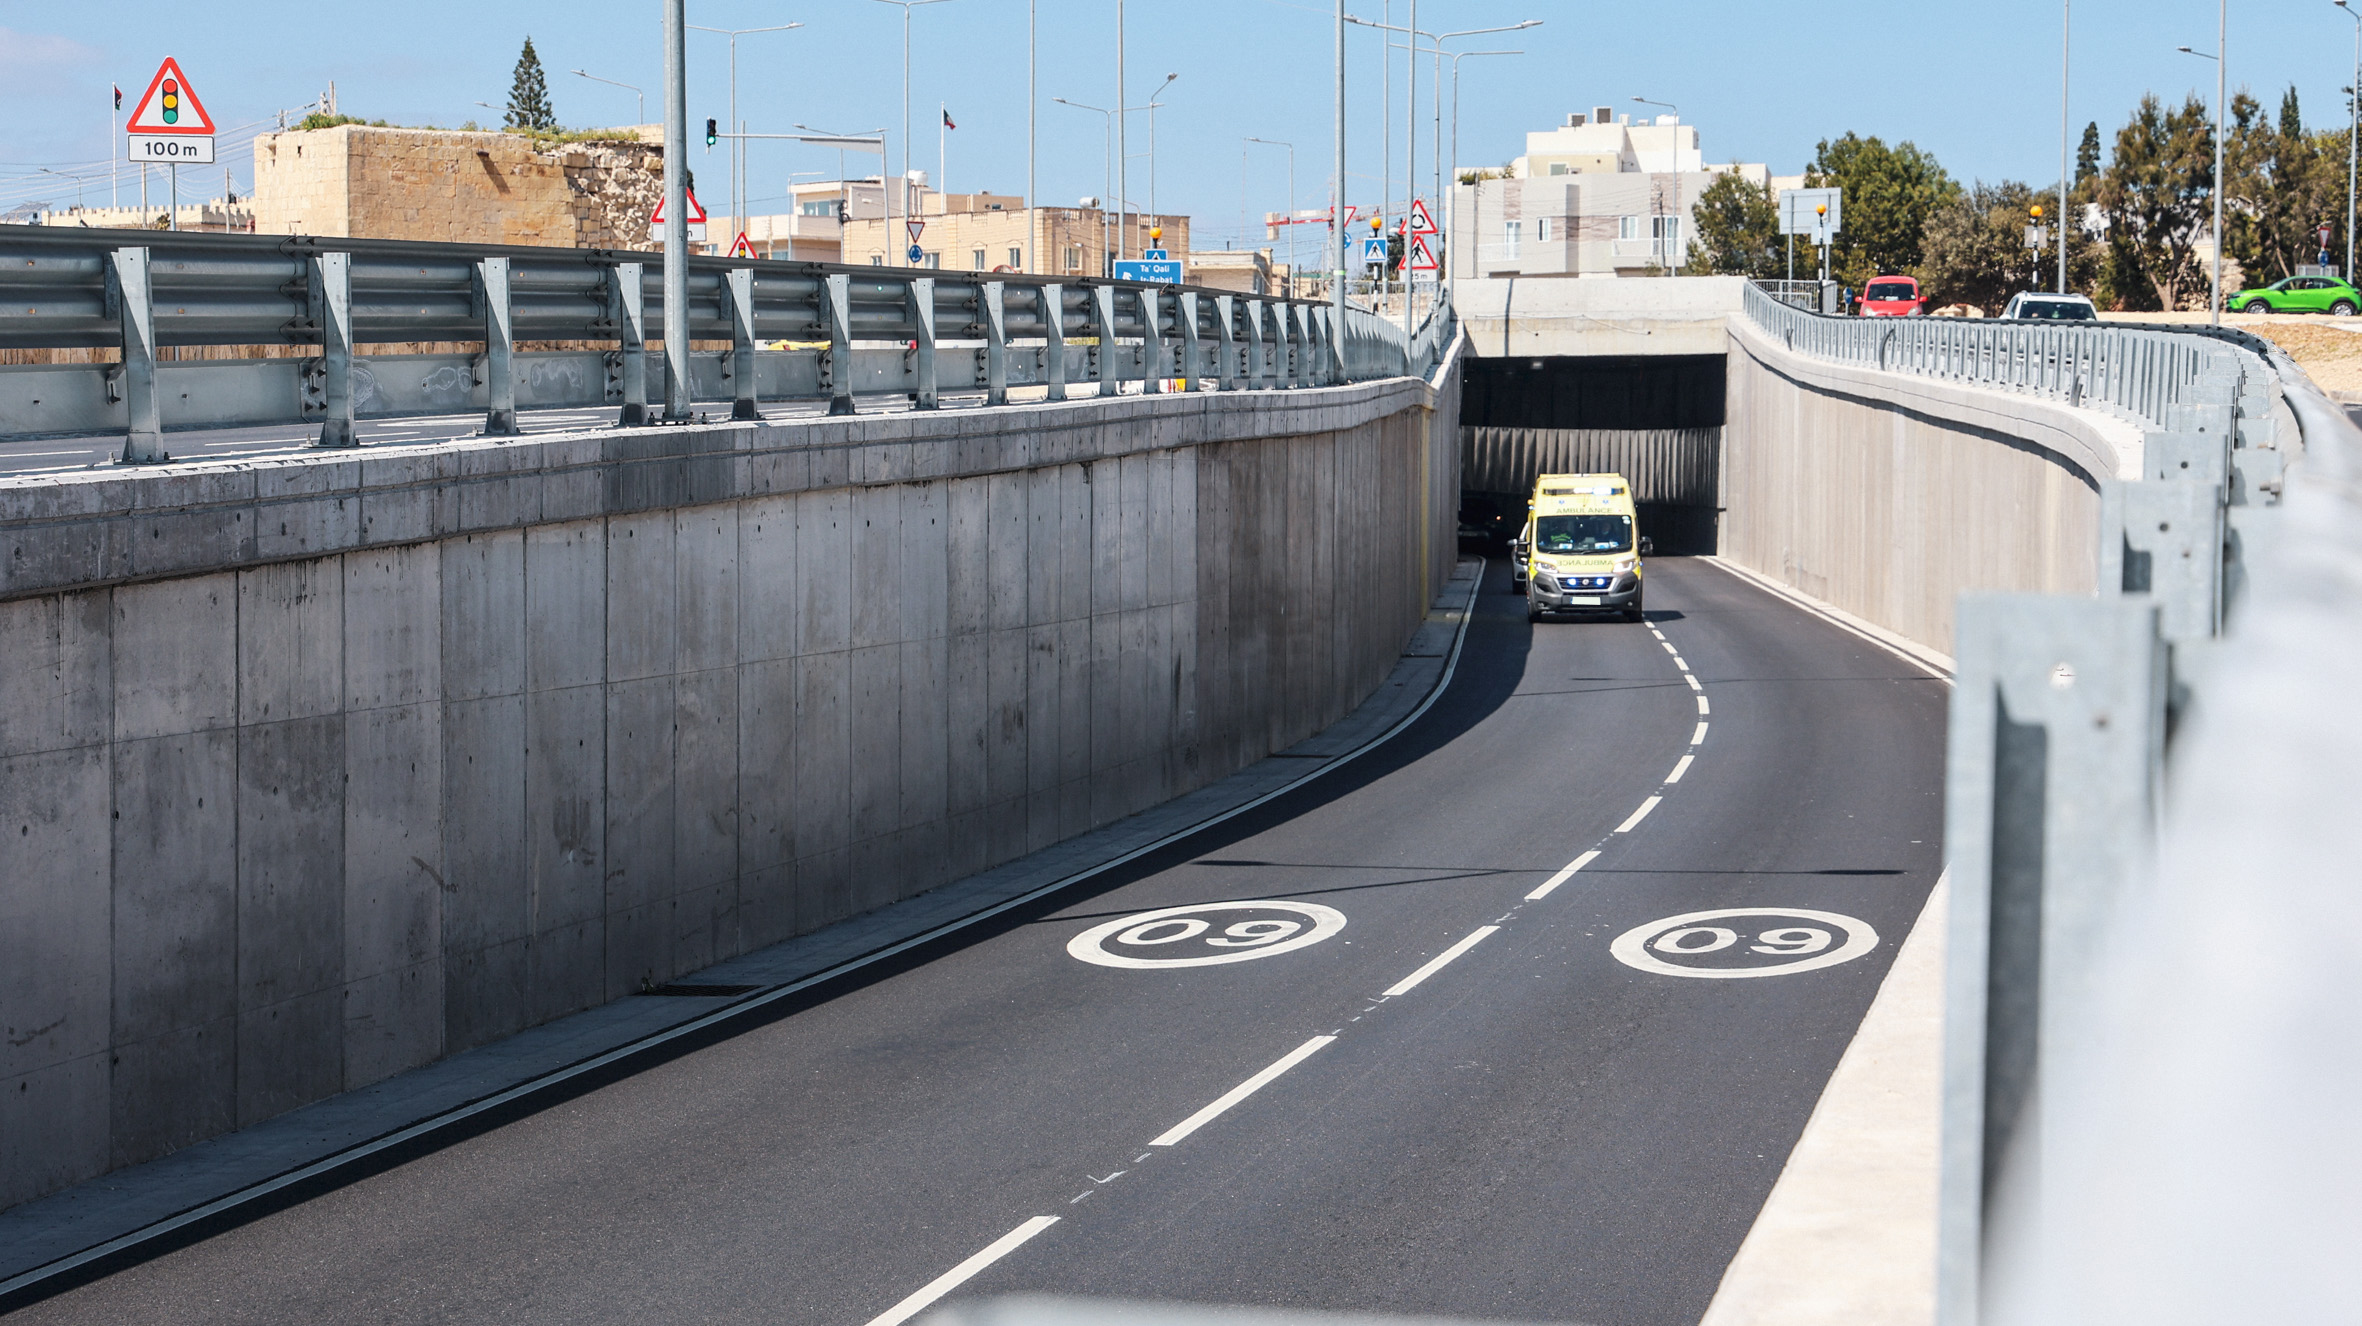 Infrastructure Malta completes the Mriehel Underpass Project